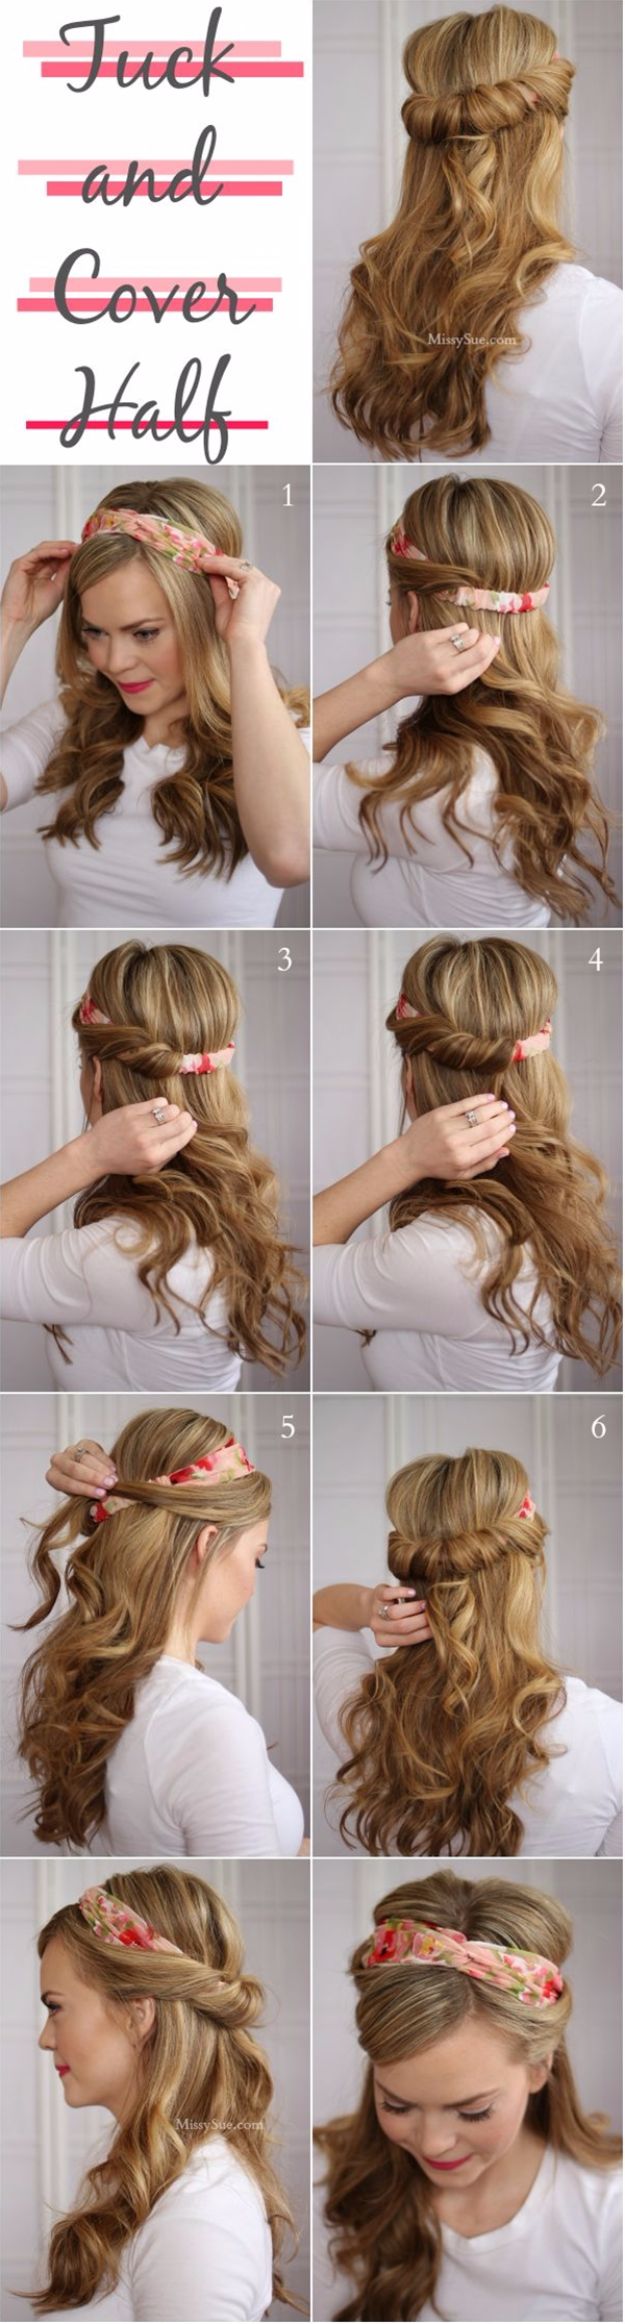 Cool Hair Tutorials for Summer - Tuck and Cover Half Up Hairstyle - Easy Hairstyles and Creative Looks for Hair - Beachy Waves, Hair Styles for Short Hair, Medium Length and Long Hair - Ponytails, Updo Ideas and Quick Last Minute Hairstyle for Teens, Teenagers and WomenCool Hair Tutorials for Summer - Tuck and Cover Half Up Hairstyle - Easy Hairstyles and Creative Looks for Hair - Beachy Waves, Hair Styles for Short Hair, Medium Length and Long Hair - Ponytails, Updo Ideas and Quick Last Minute Hairstyle for Teens, Teenagers and Women